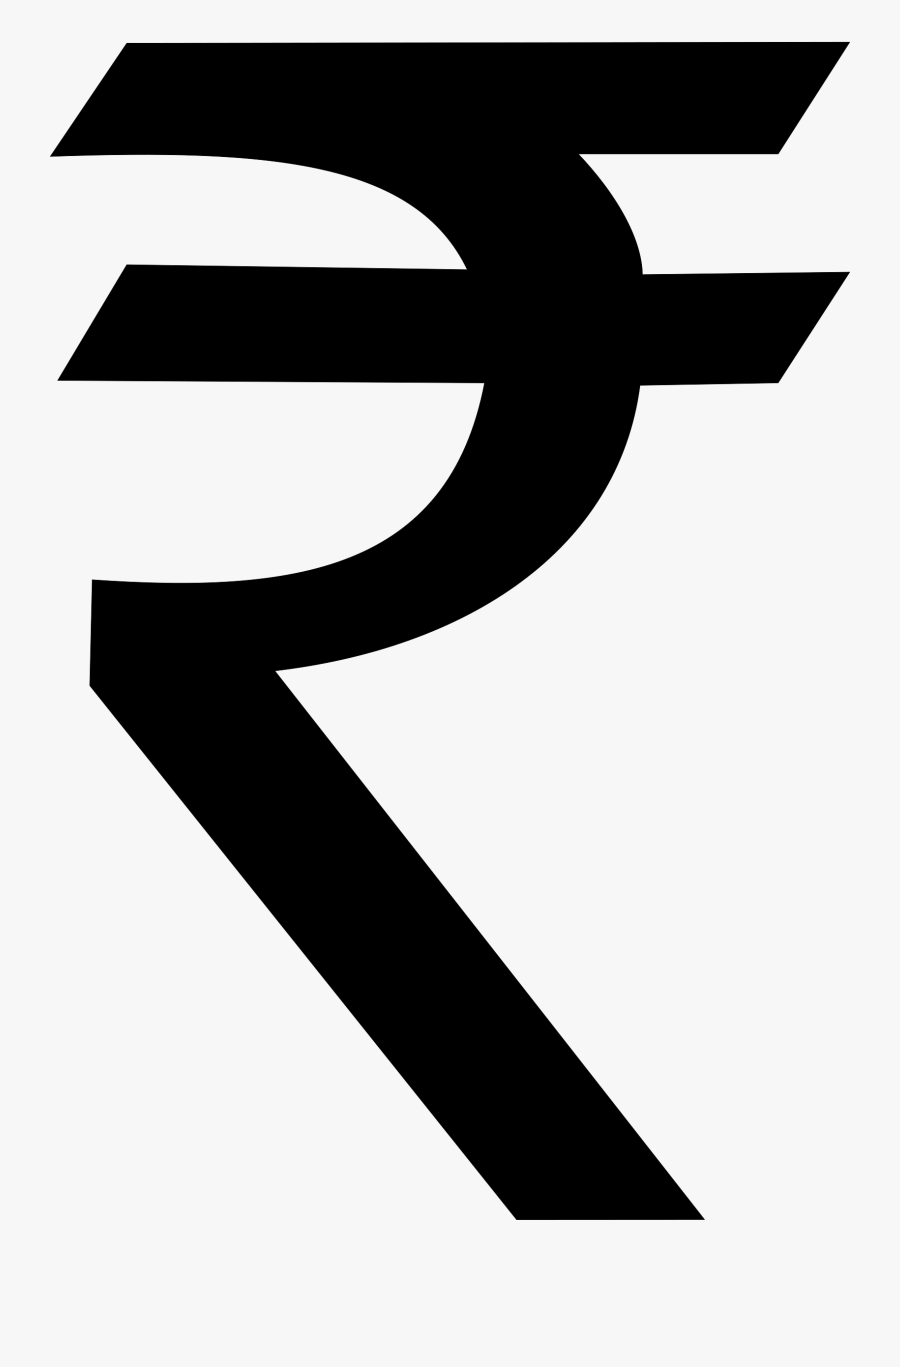 Money Black And White Indian Money Clipart Black And - Rupee Symbol Png, Transparent Clipart